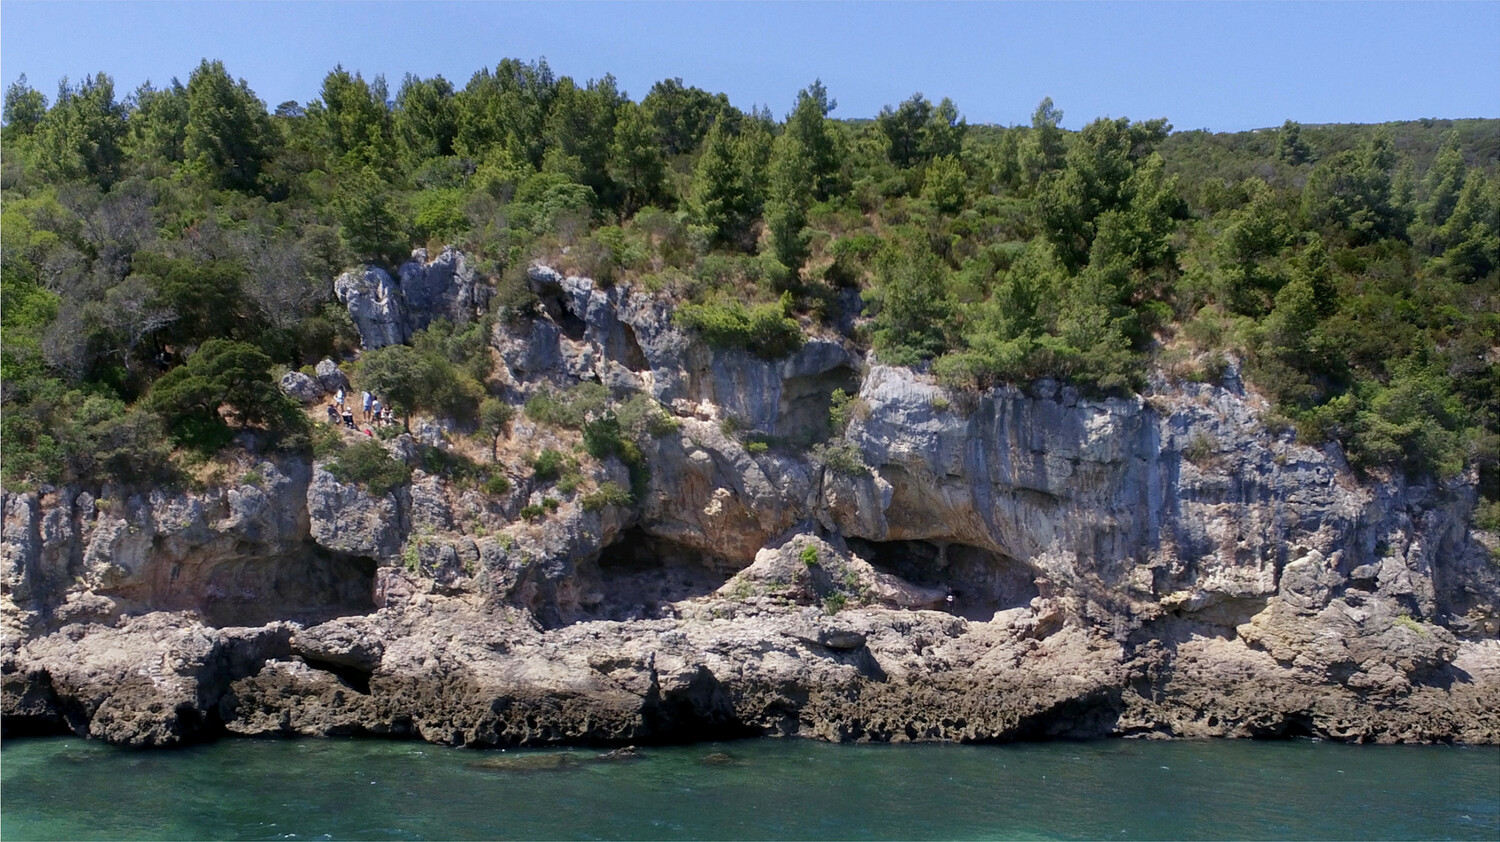 View of the Figueira Brava cave with its three entrances.